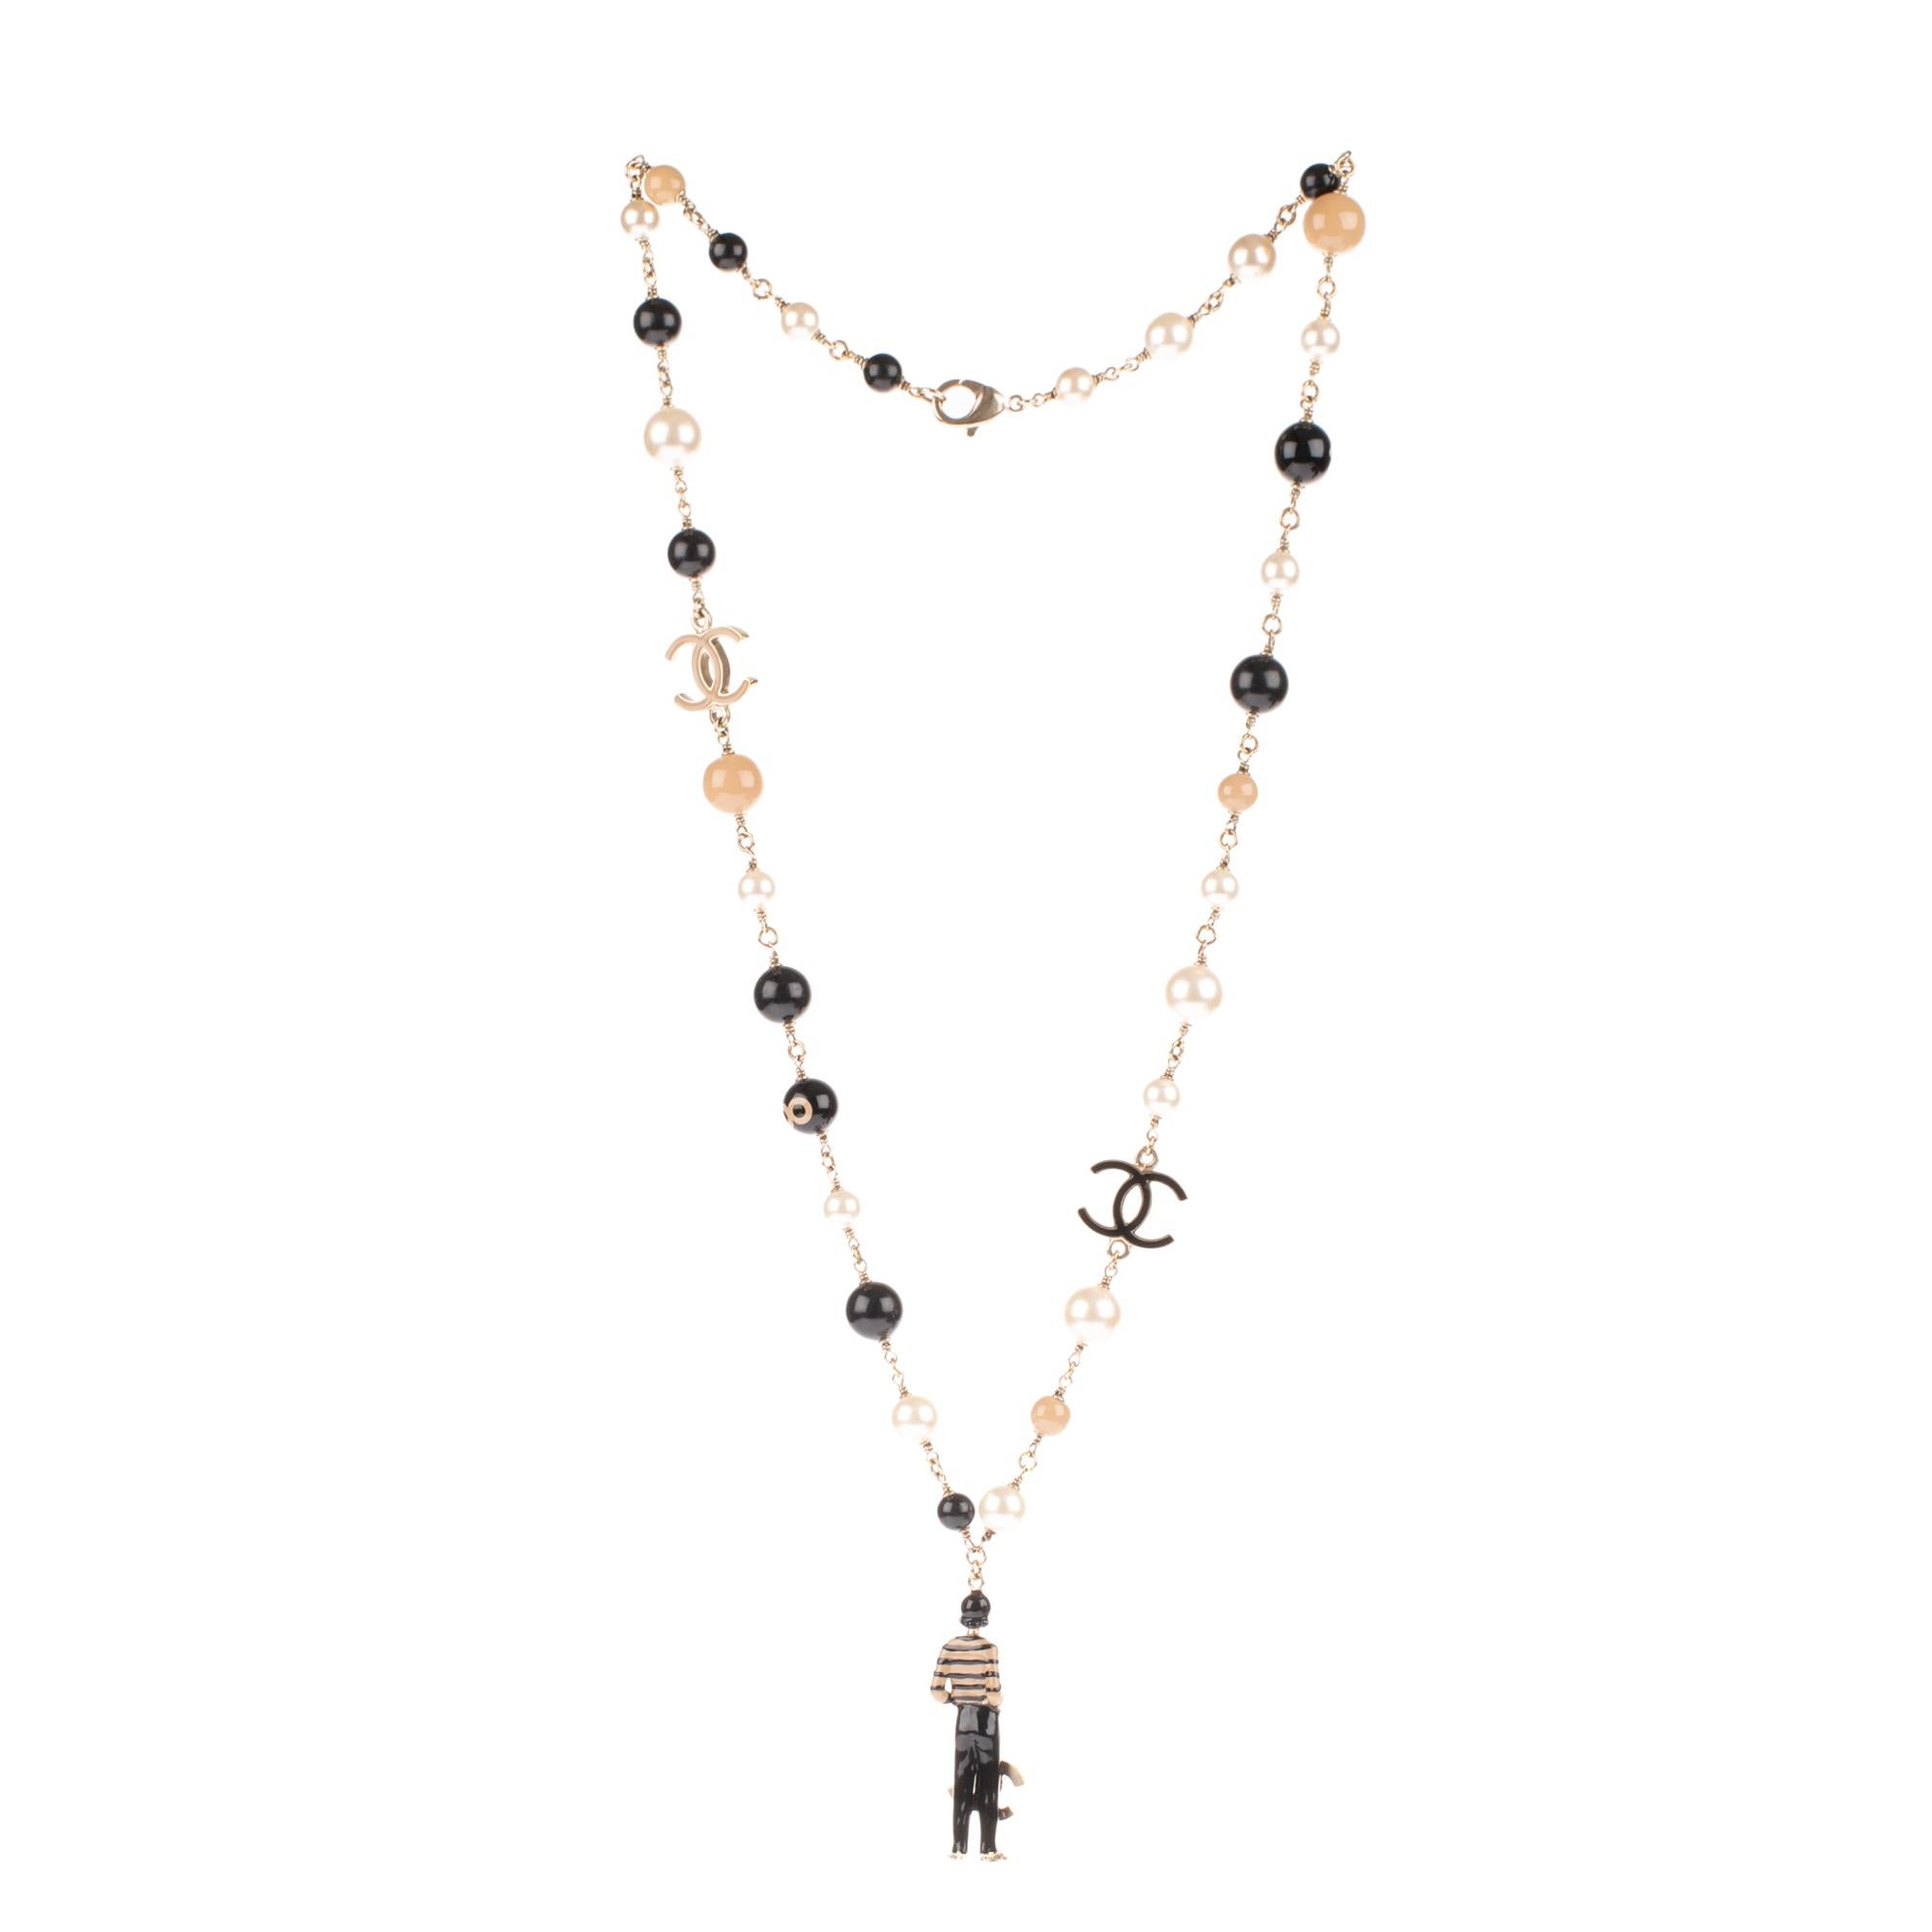 Gorgeous Chanel necklace released on the occasion of the brand’s 100th anniversary.
Very rare collector piece with a metal chain threaded with fancy black beads, taupe, white and metal charms stamped CC. The necklace wears to its extreme a metallic